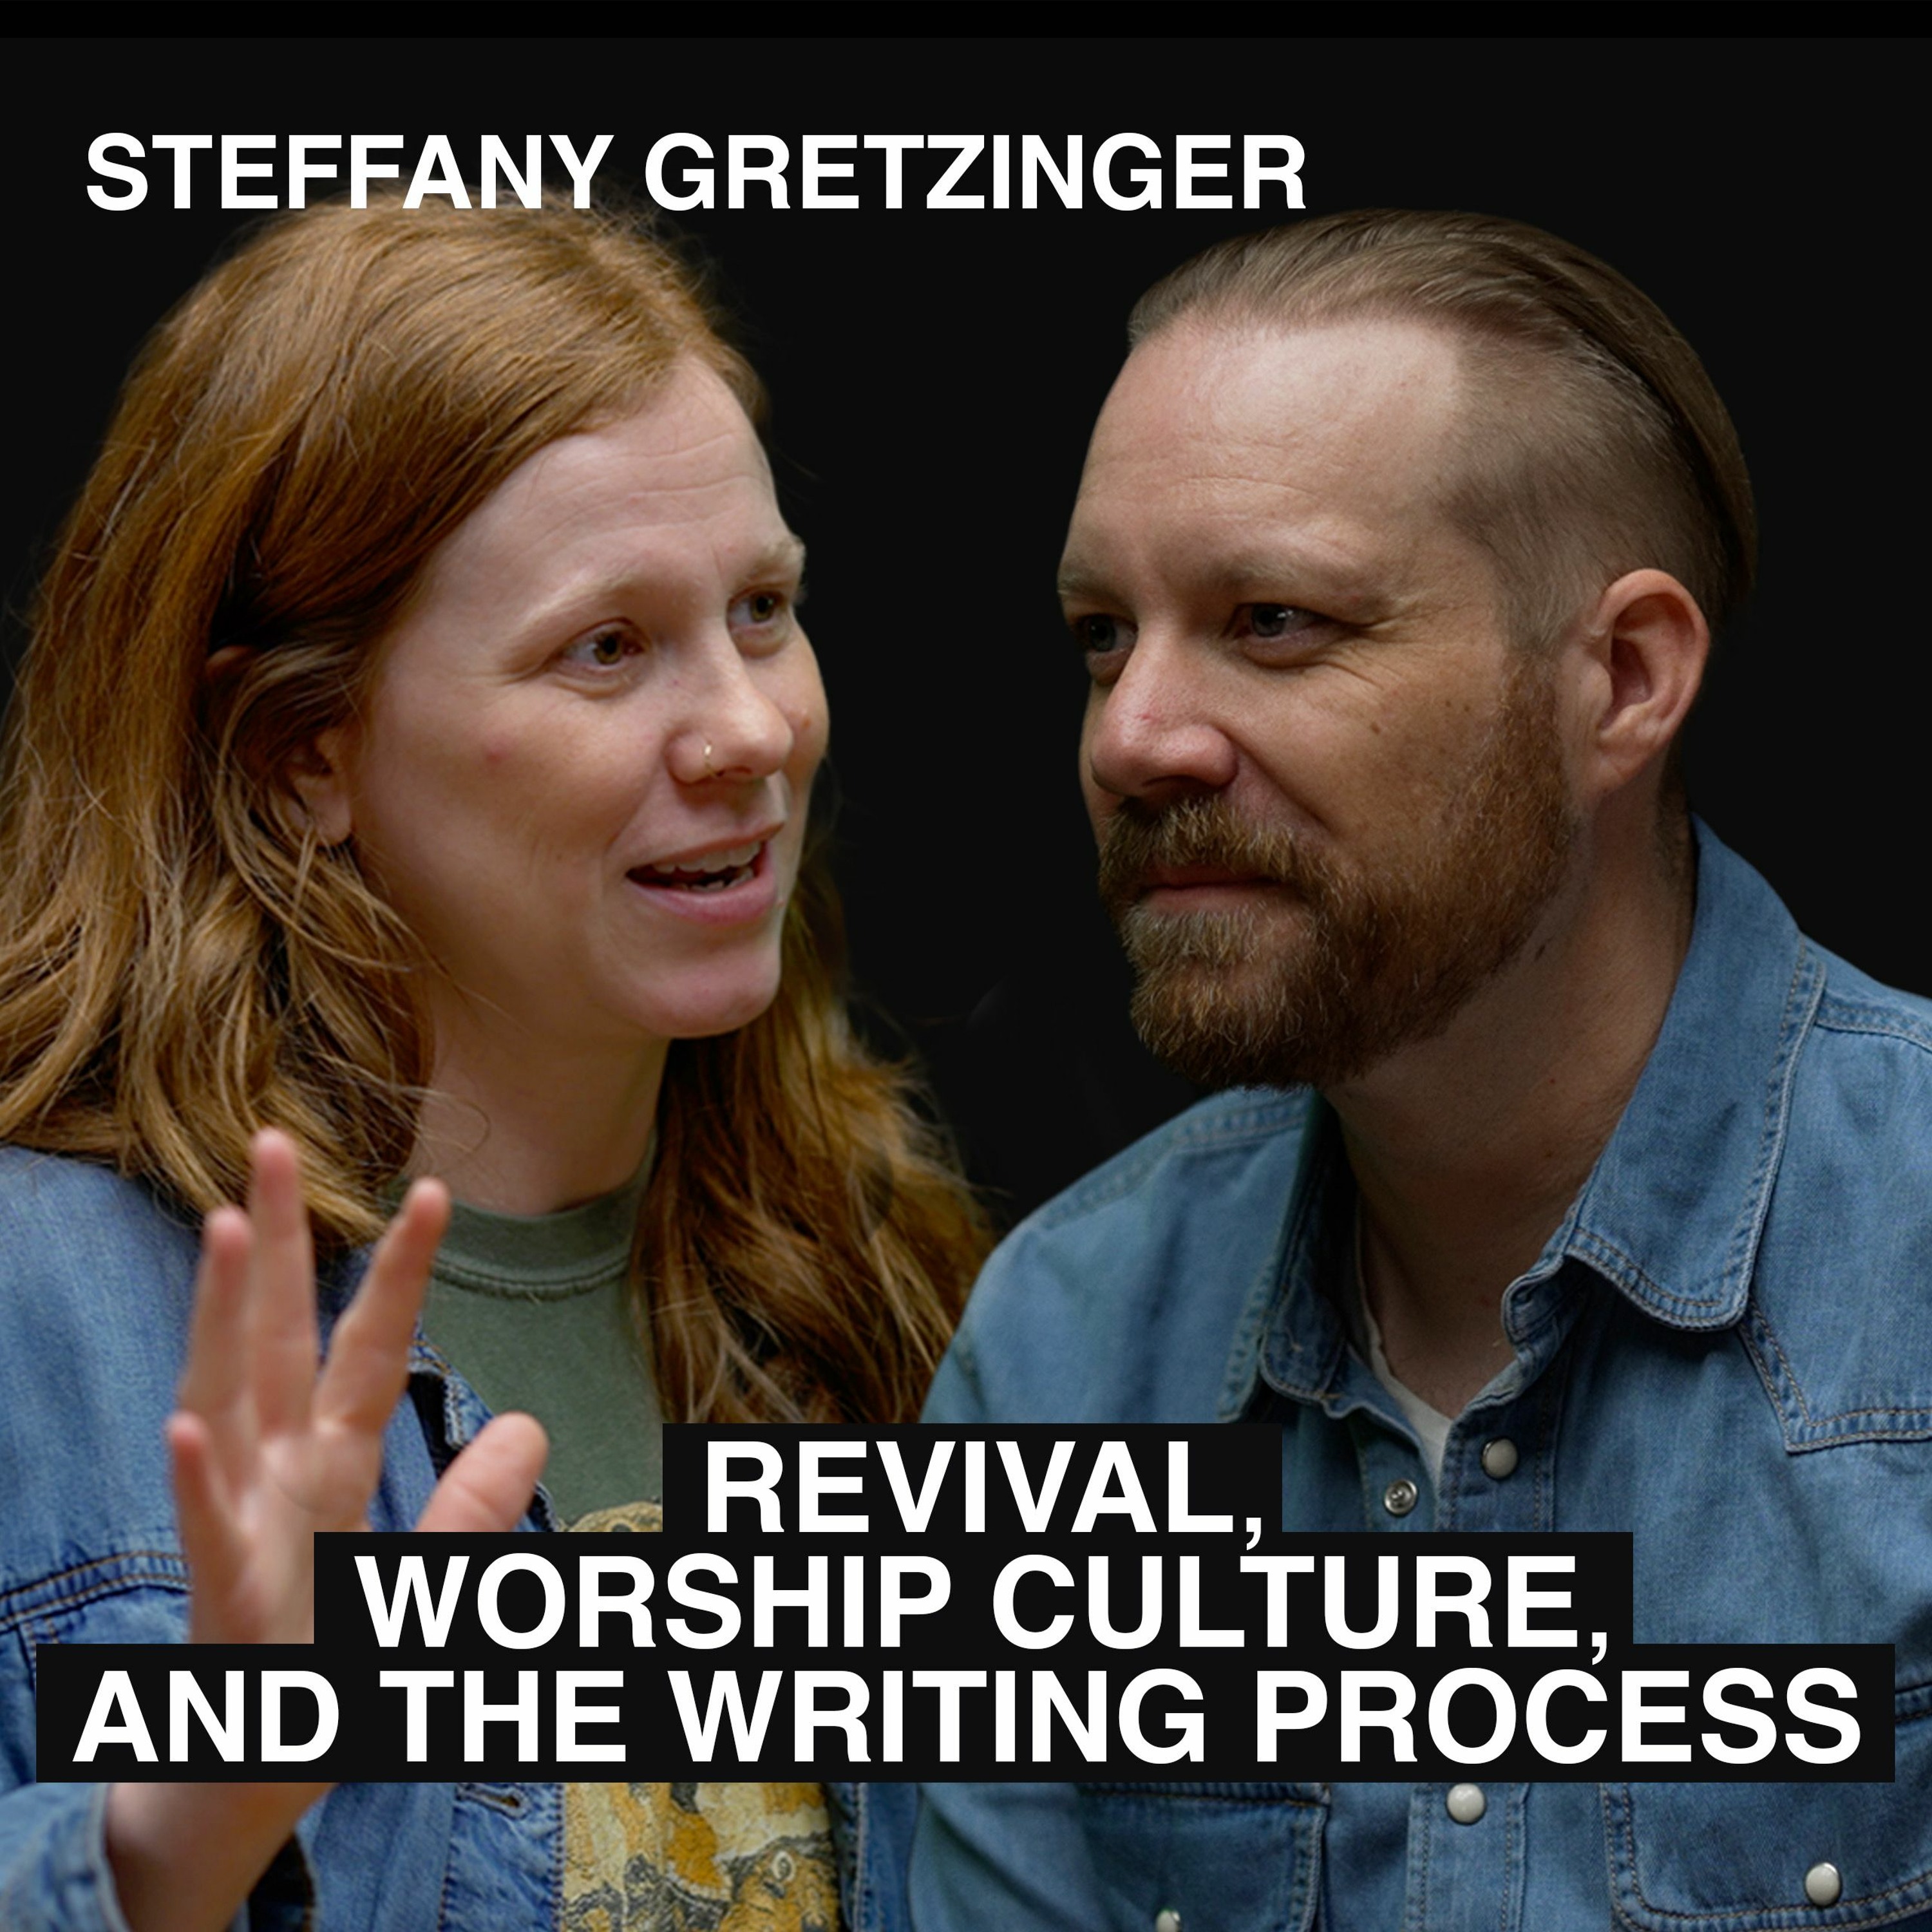 Steffany Gretzinger: Revival, Worship Culture, and the Writing Process